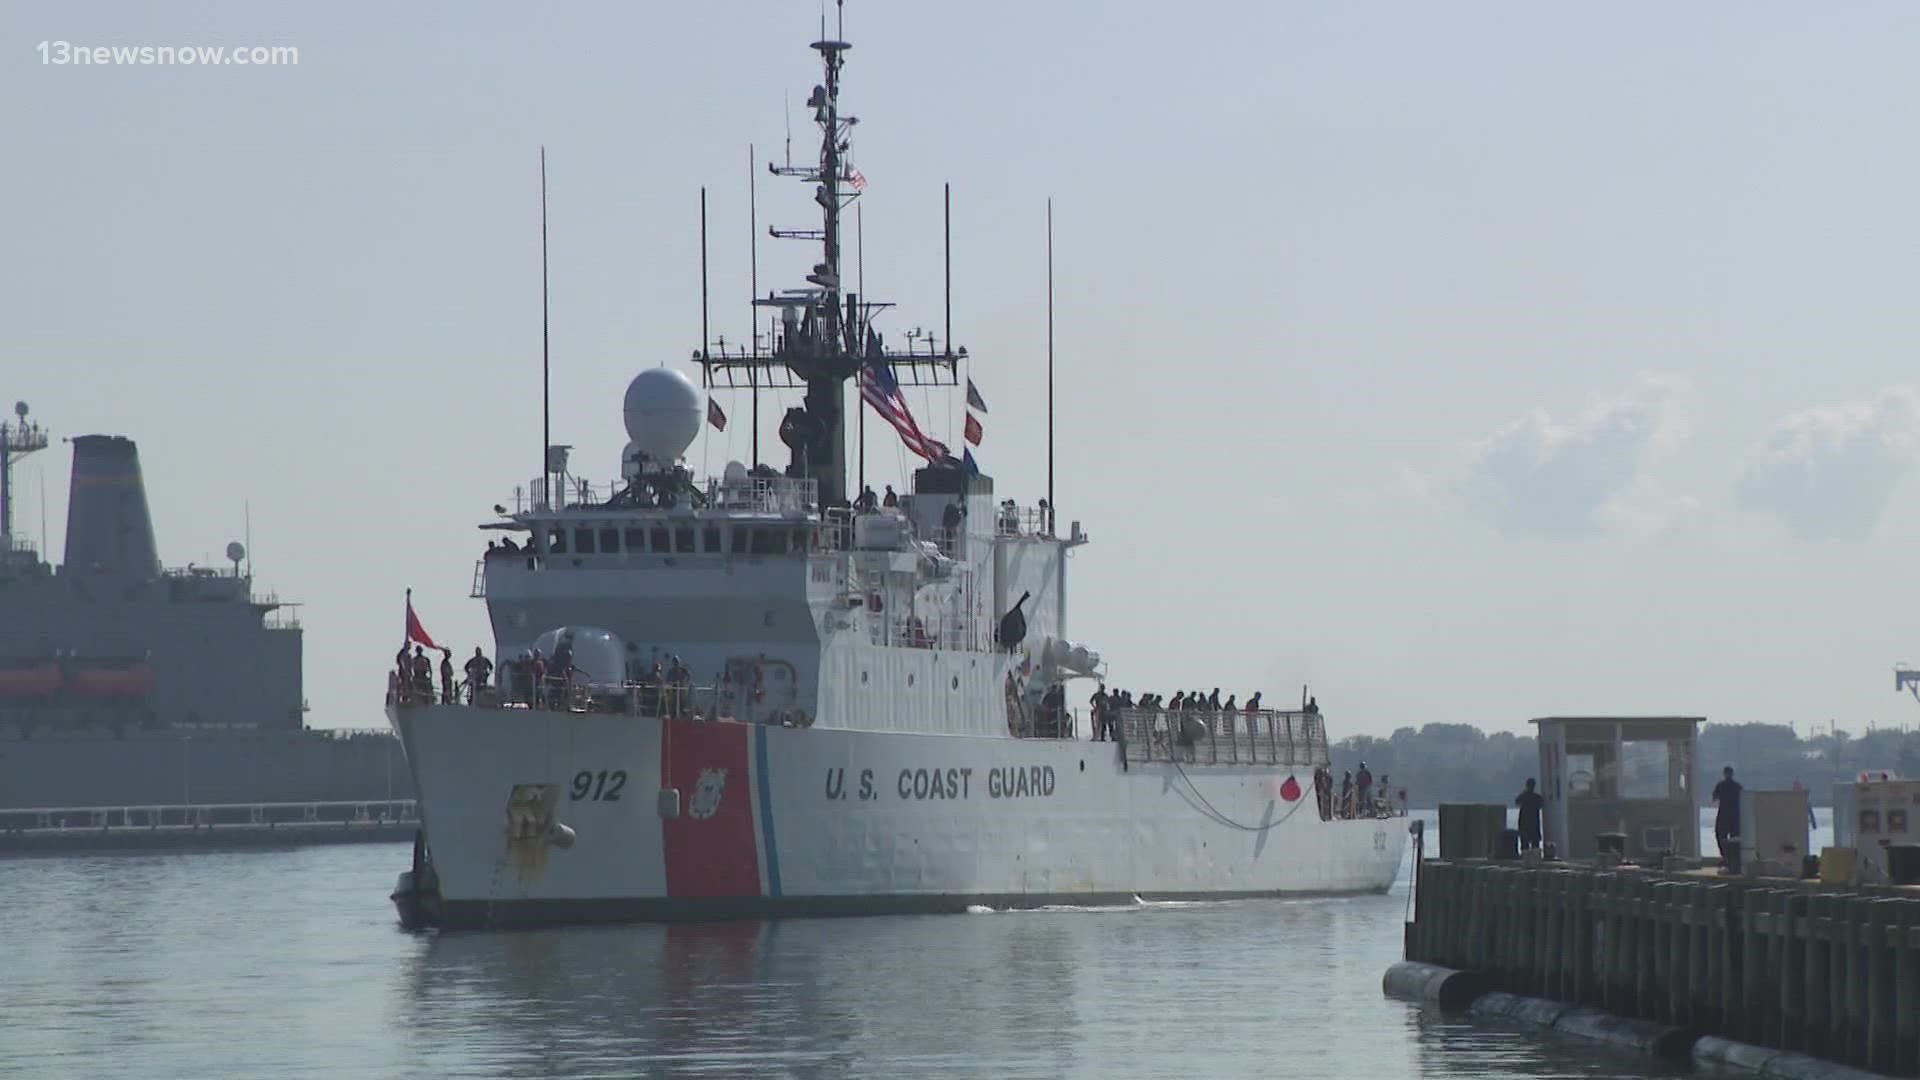 The crew of the US Coast Guard cutter Legare is back in Portsmouth after an 11-week deployment.